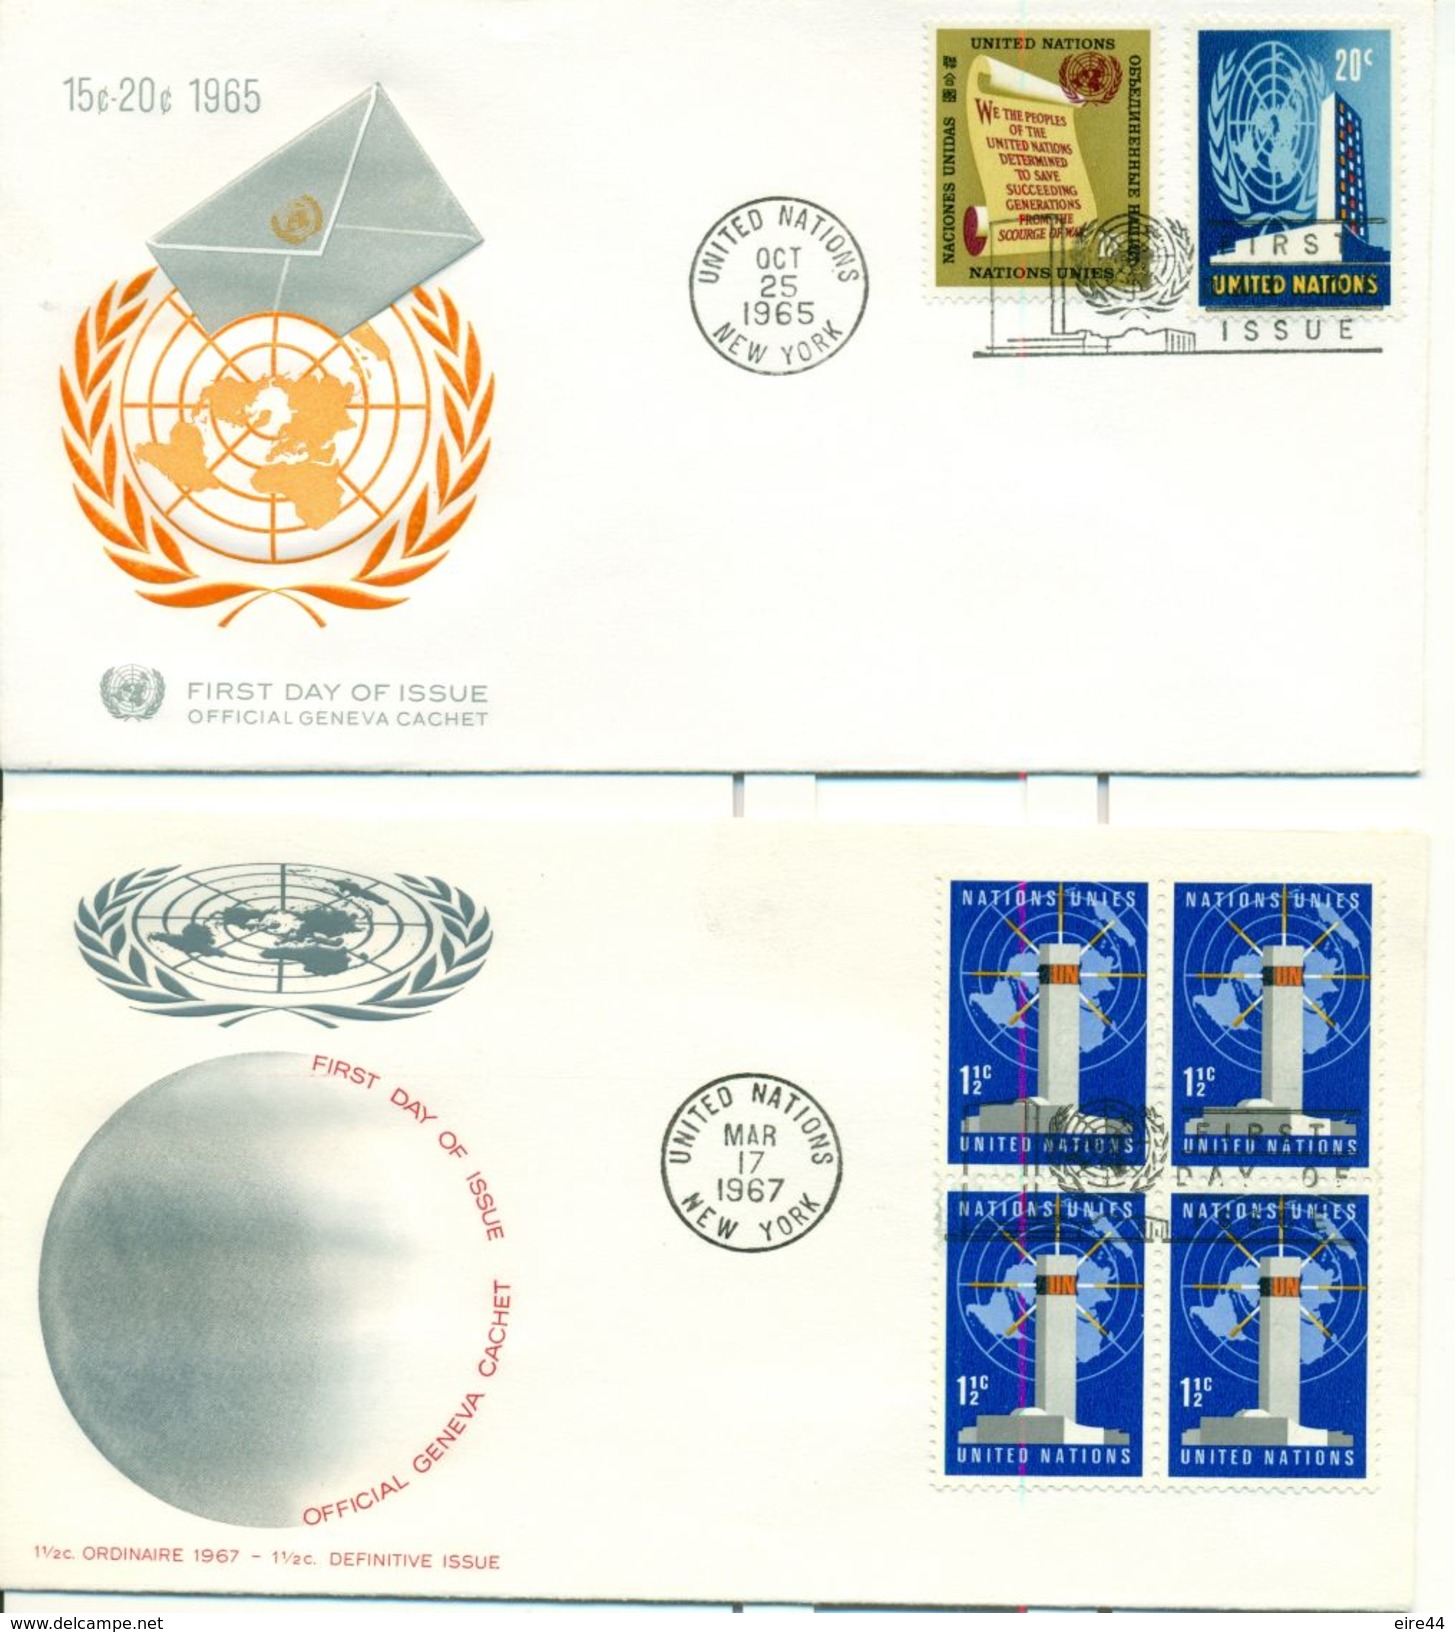 United Nations New York  22 FDC definitive issue dauerserie